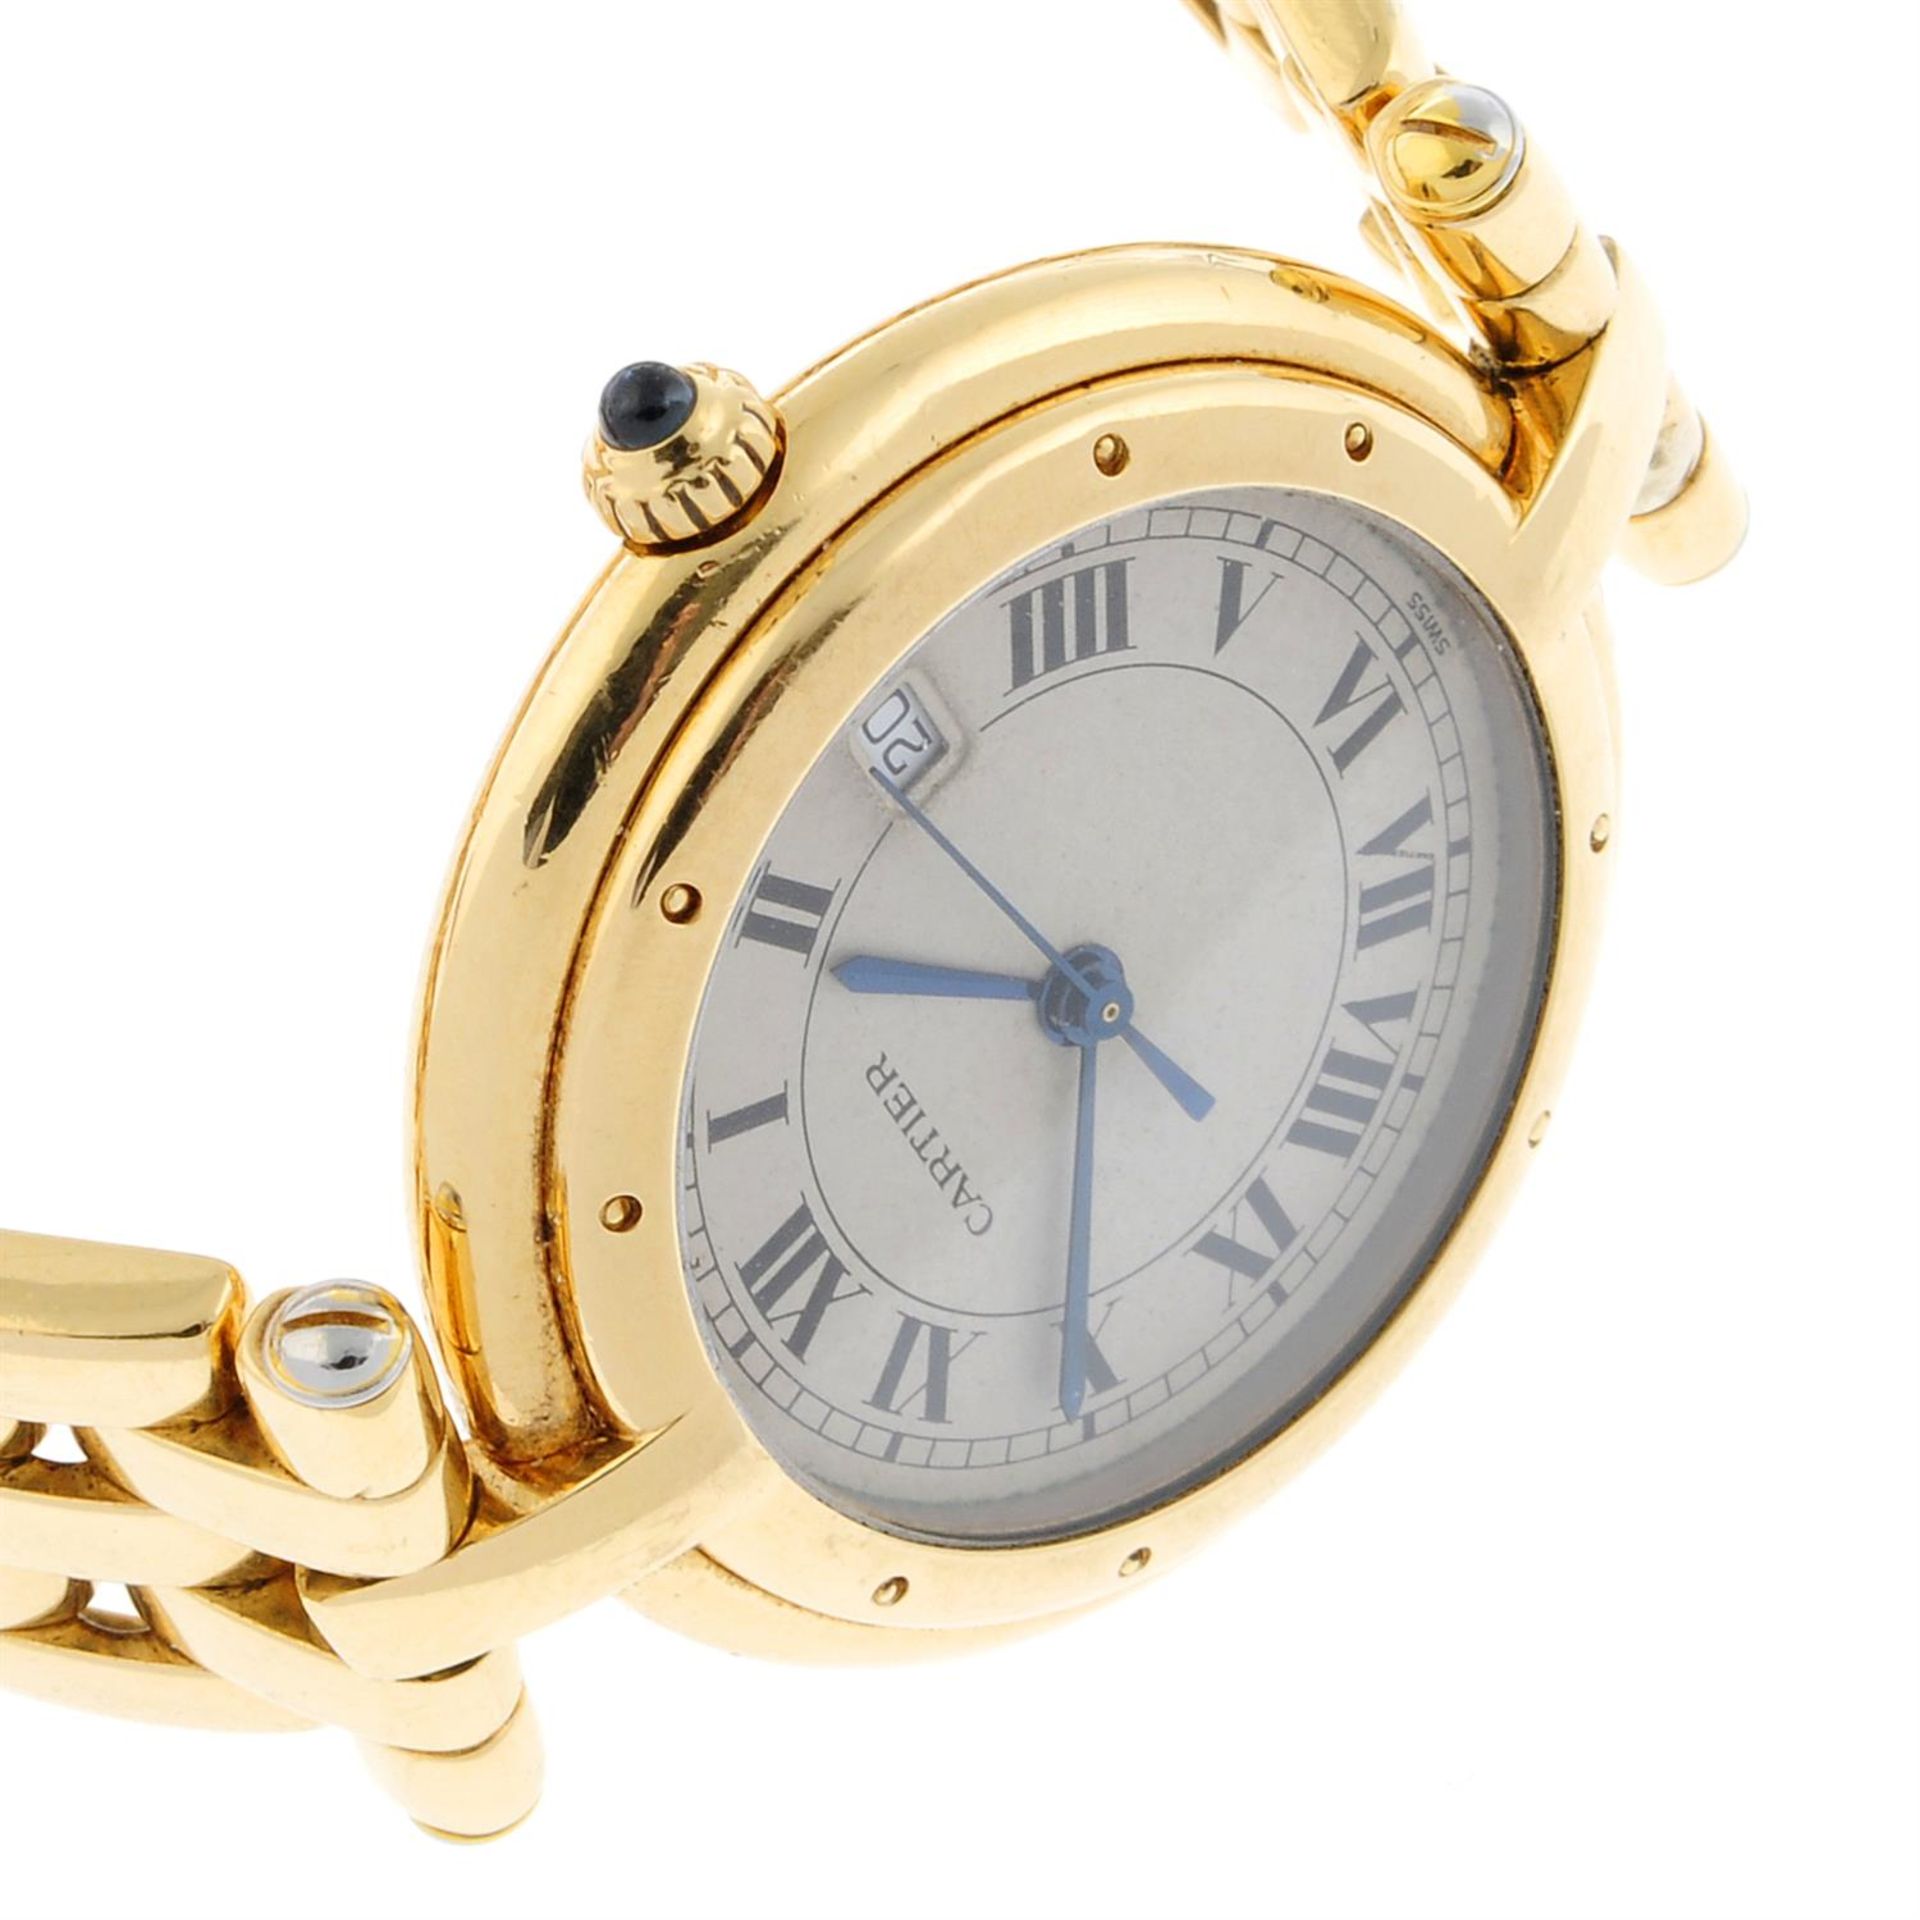 CARTIER - a 18ct gold Panthere Vendome bracelet watch, 24mm. - Image 3 of 6